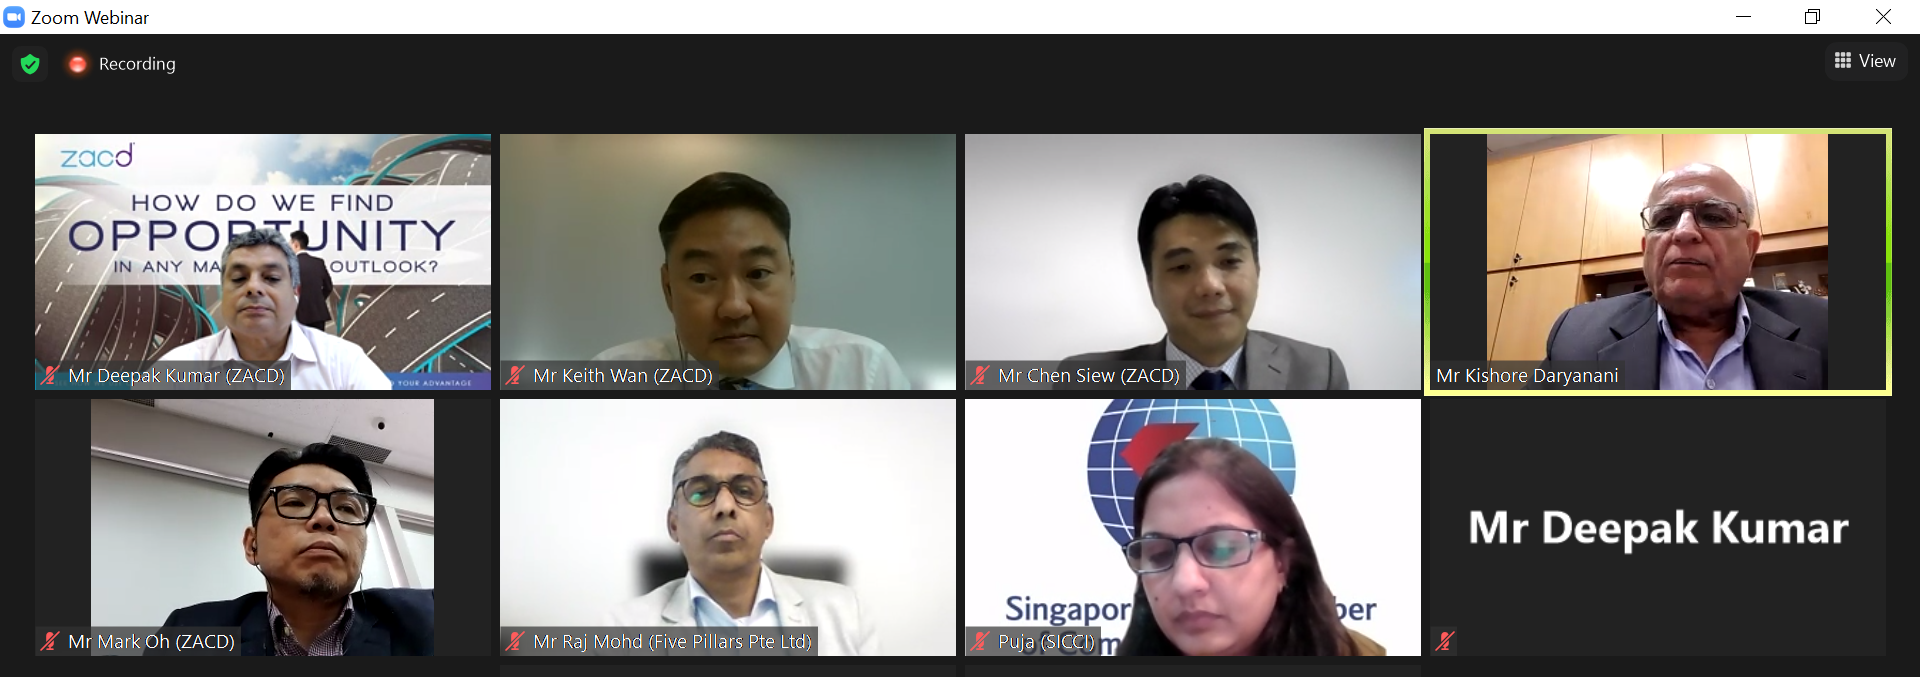 Alternative Real Estate Investment Opportunities in Singapore Webinar